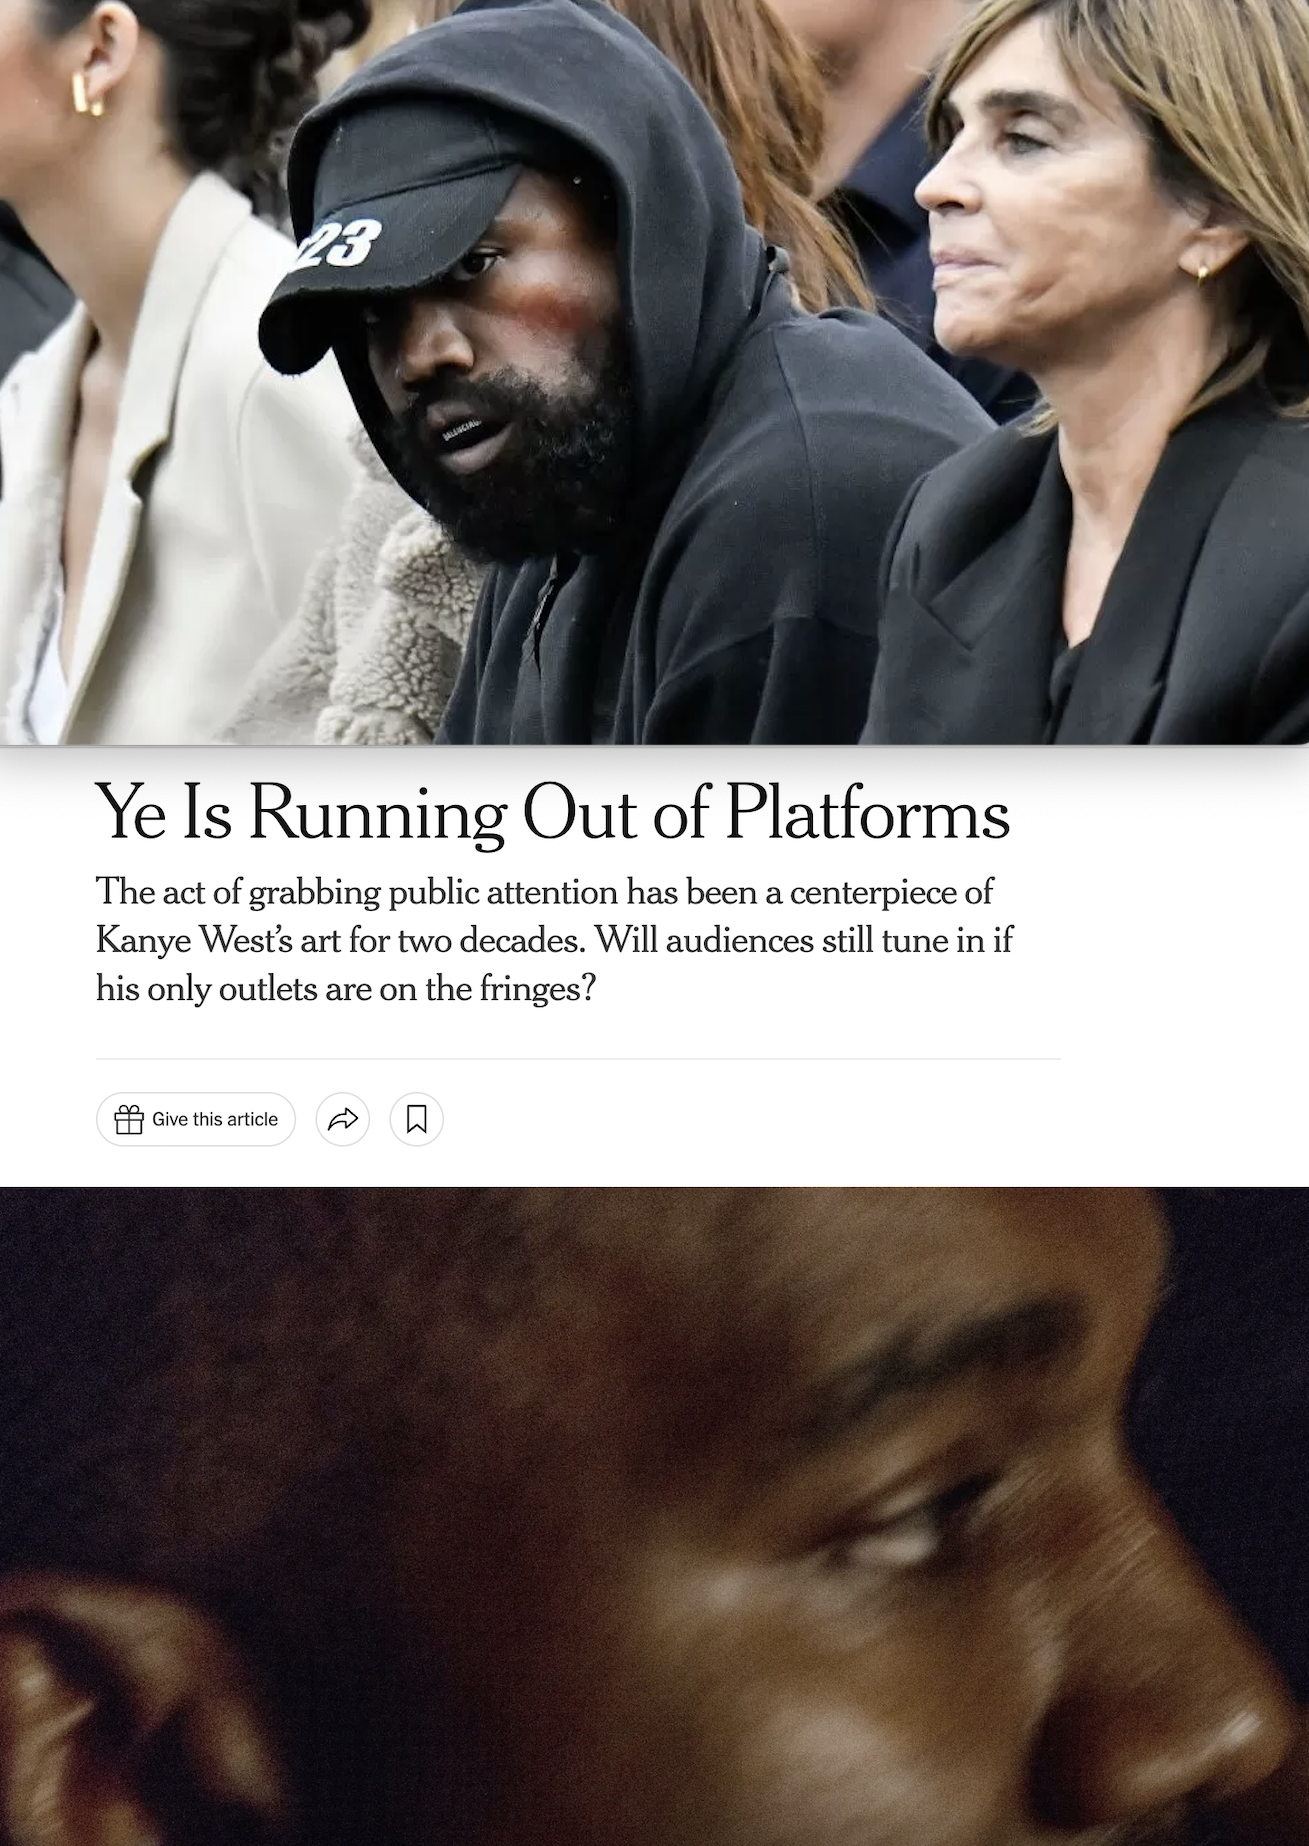 A Plea to Fashion Media: Stop Covering Kanye West Uncritically